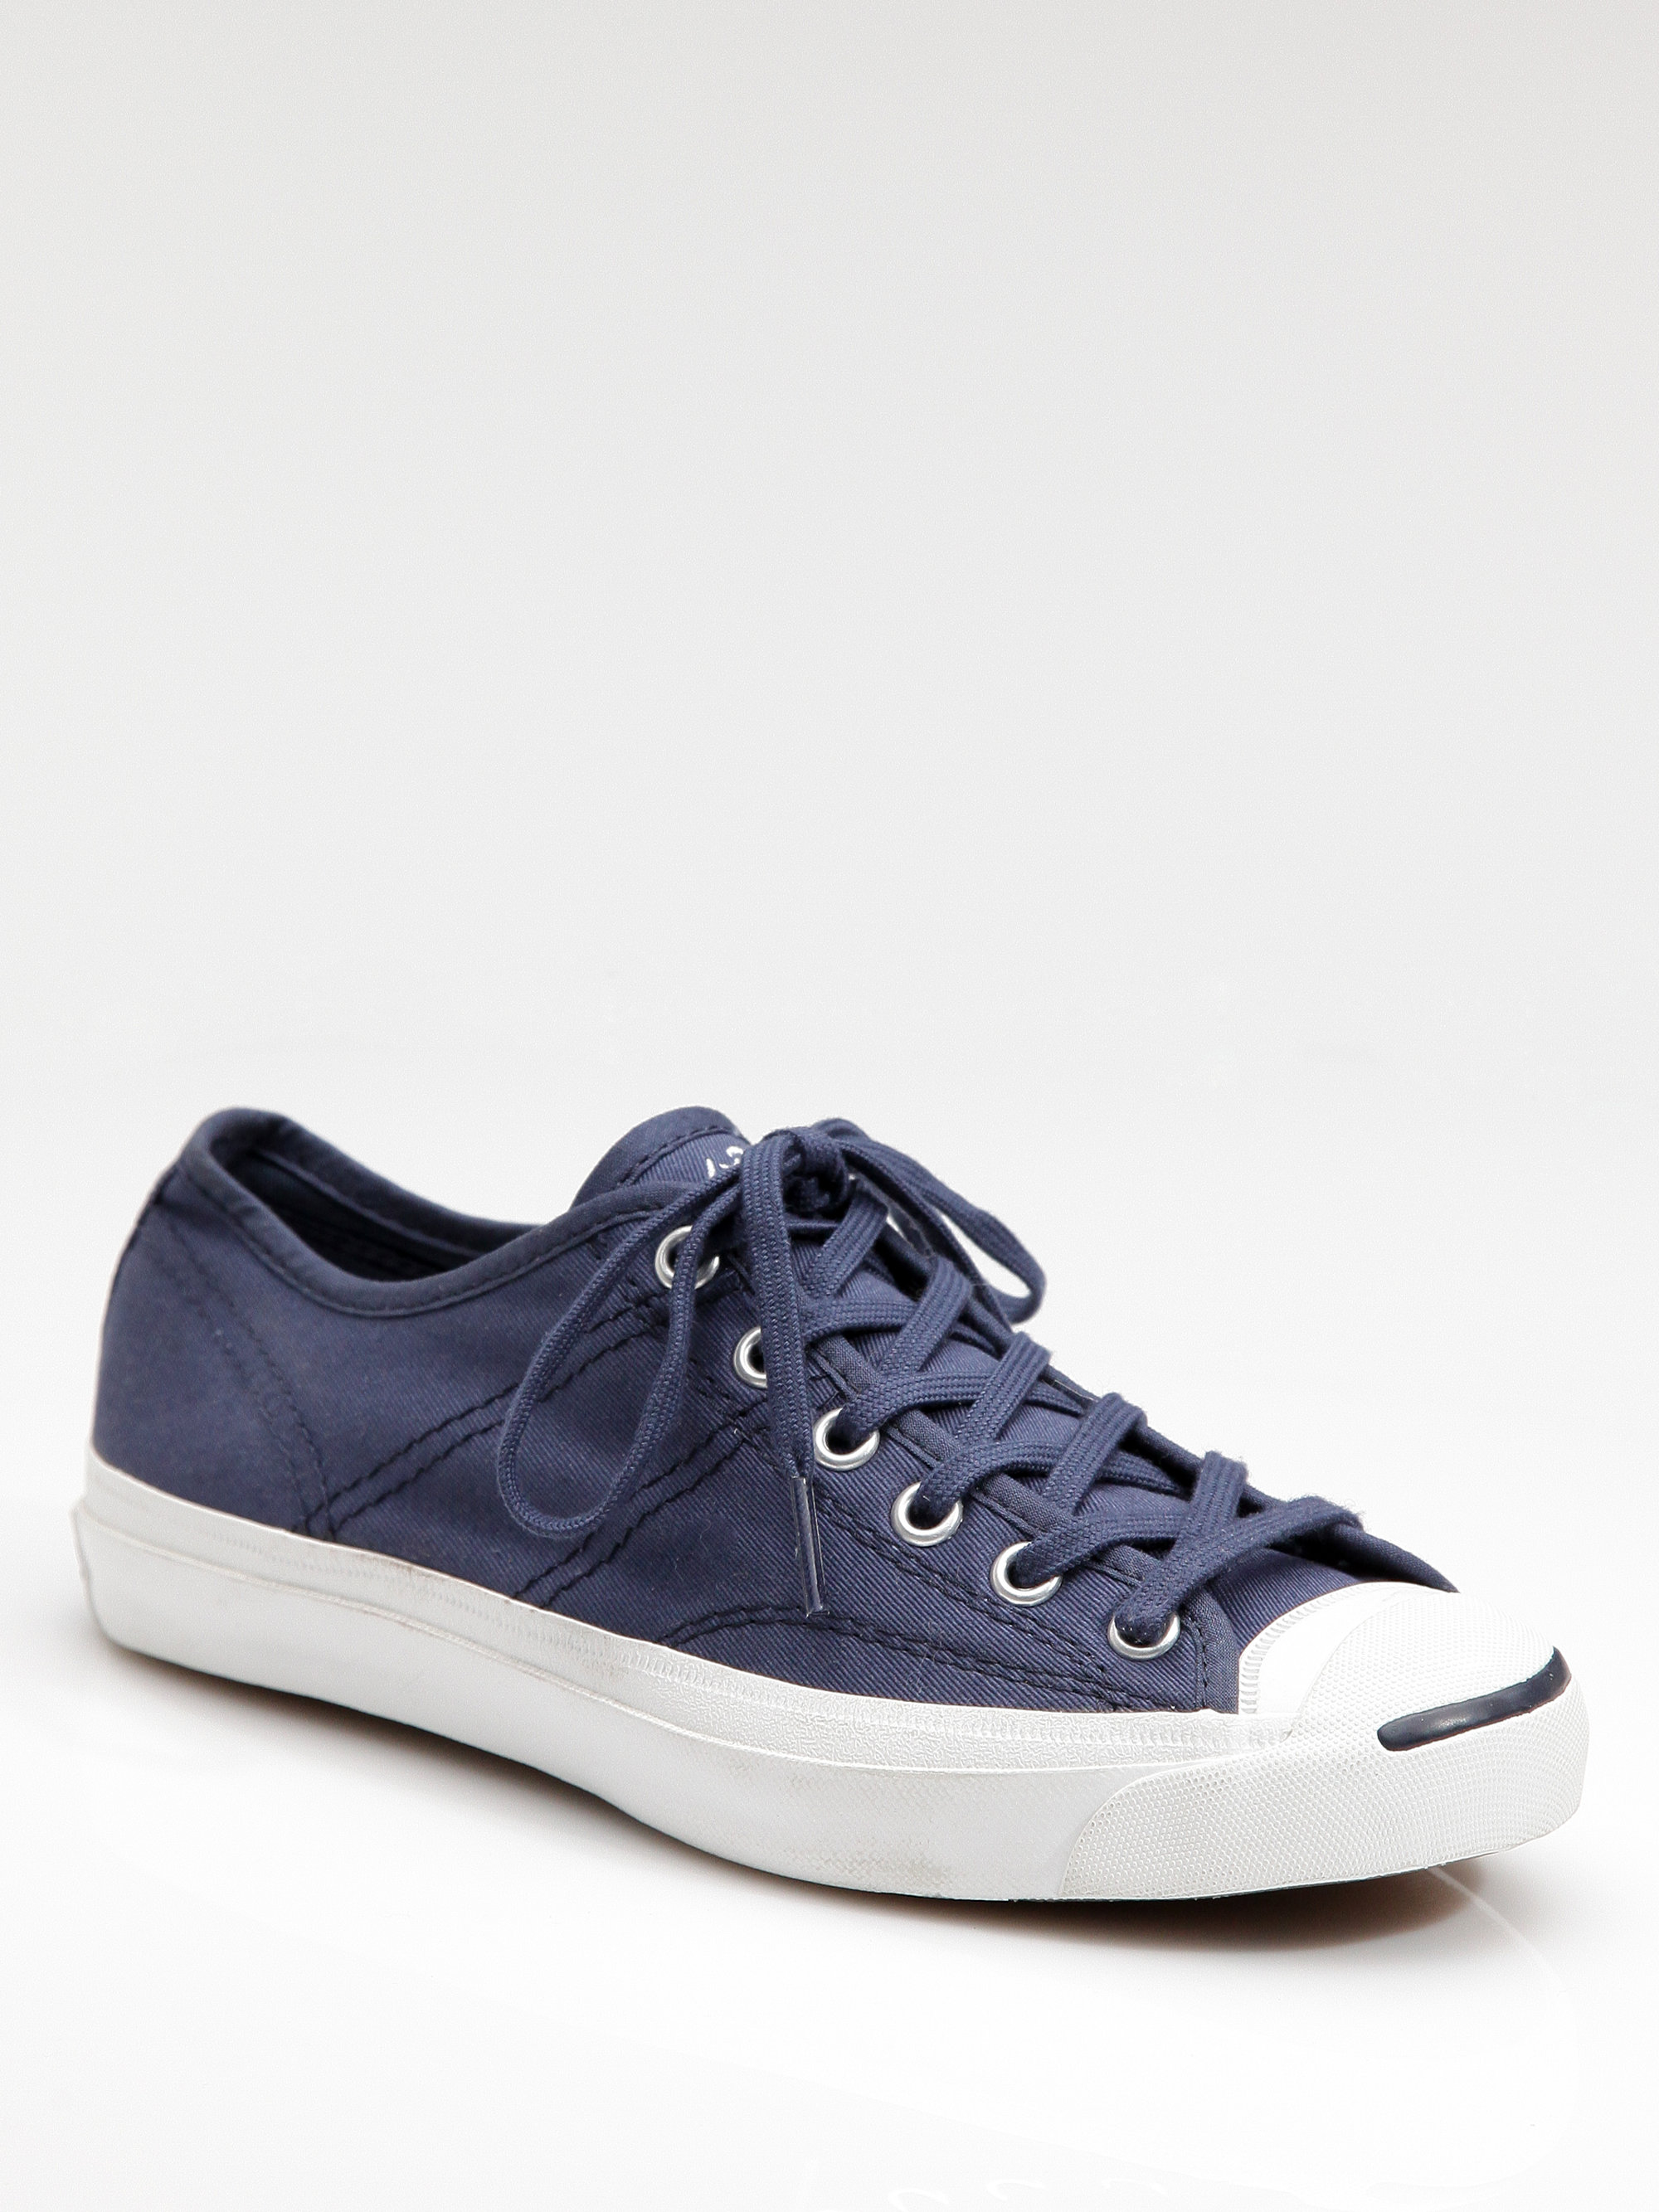 Converse Unisex Lux Jack Purcell Laceup Sneakers in Blue | Lyst